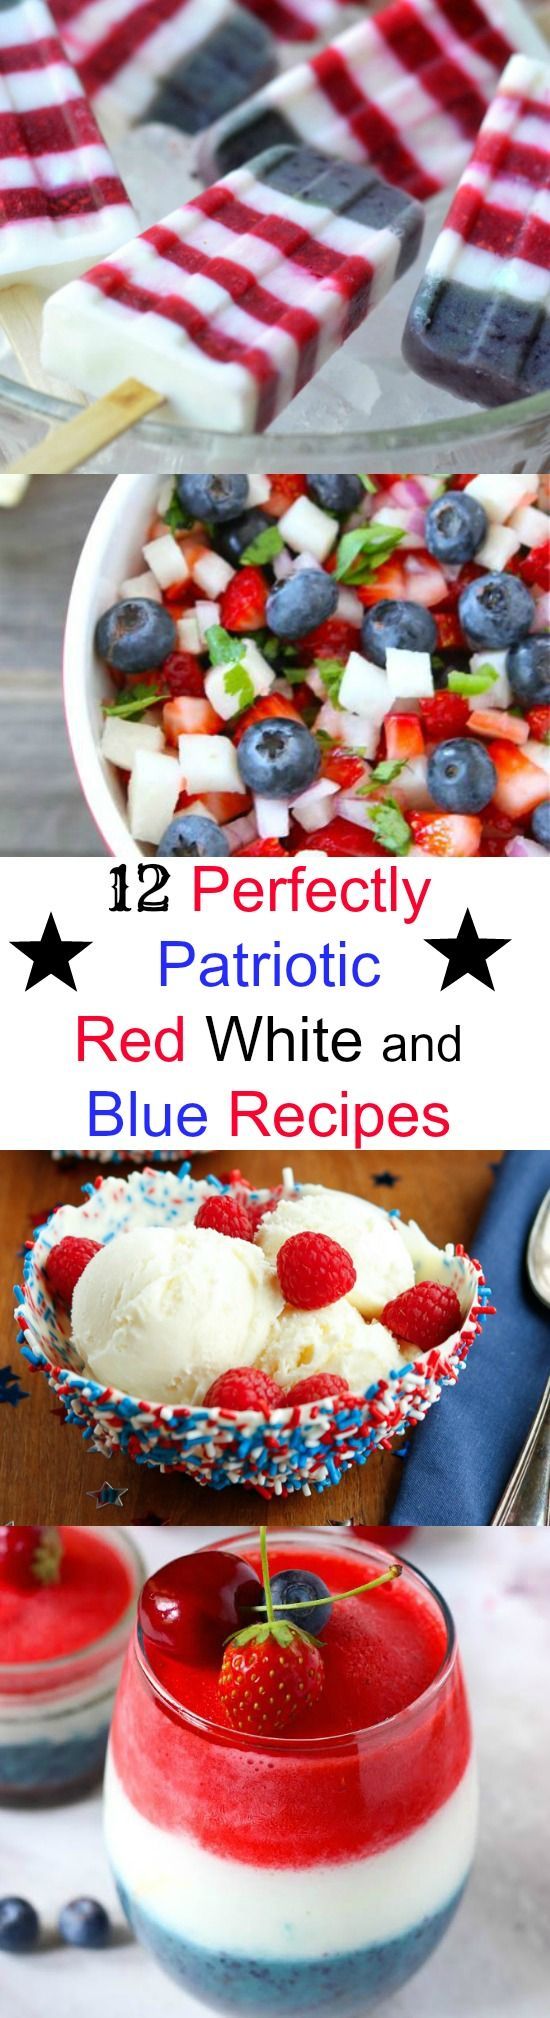 12 Perfectly Patriotic Red, White, and Blue Recipes